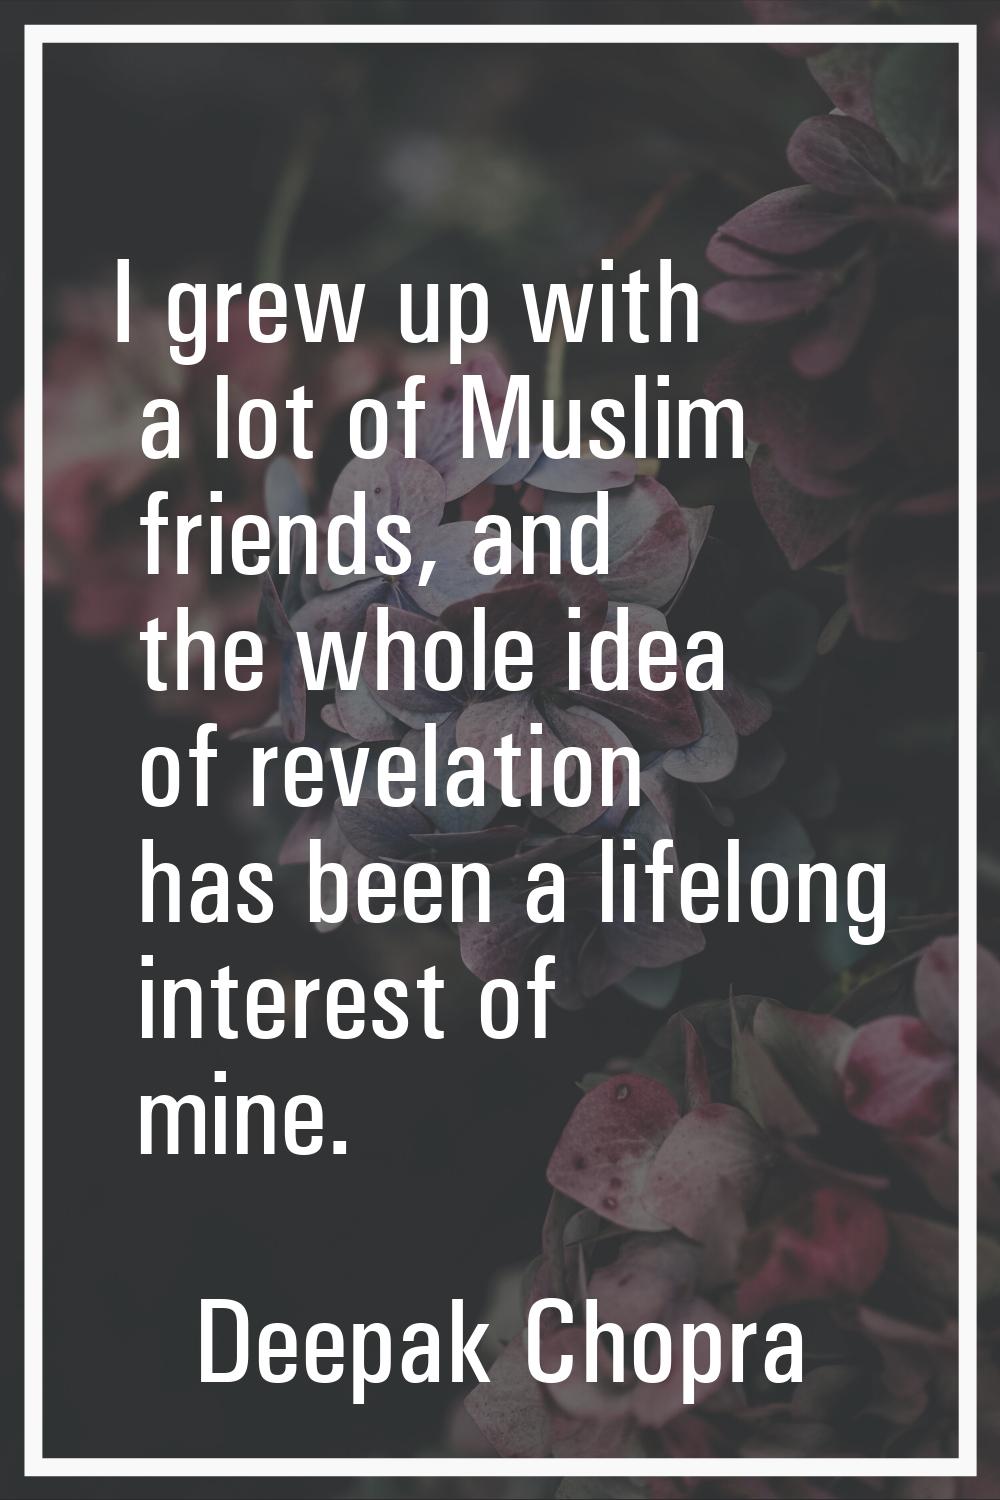 I grew up with a lot of Muslim friends, and the whole idea of revelation has been a lifelong intere